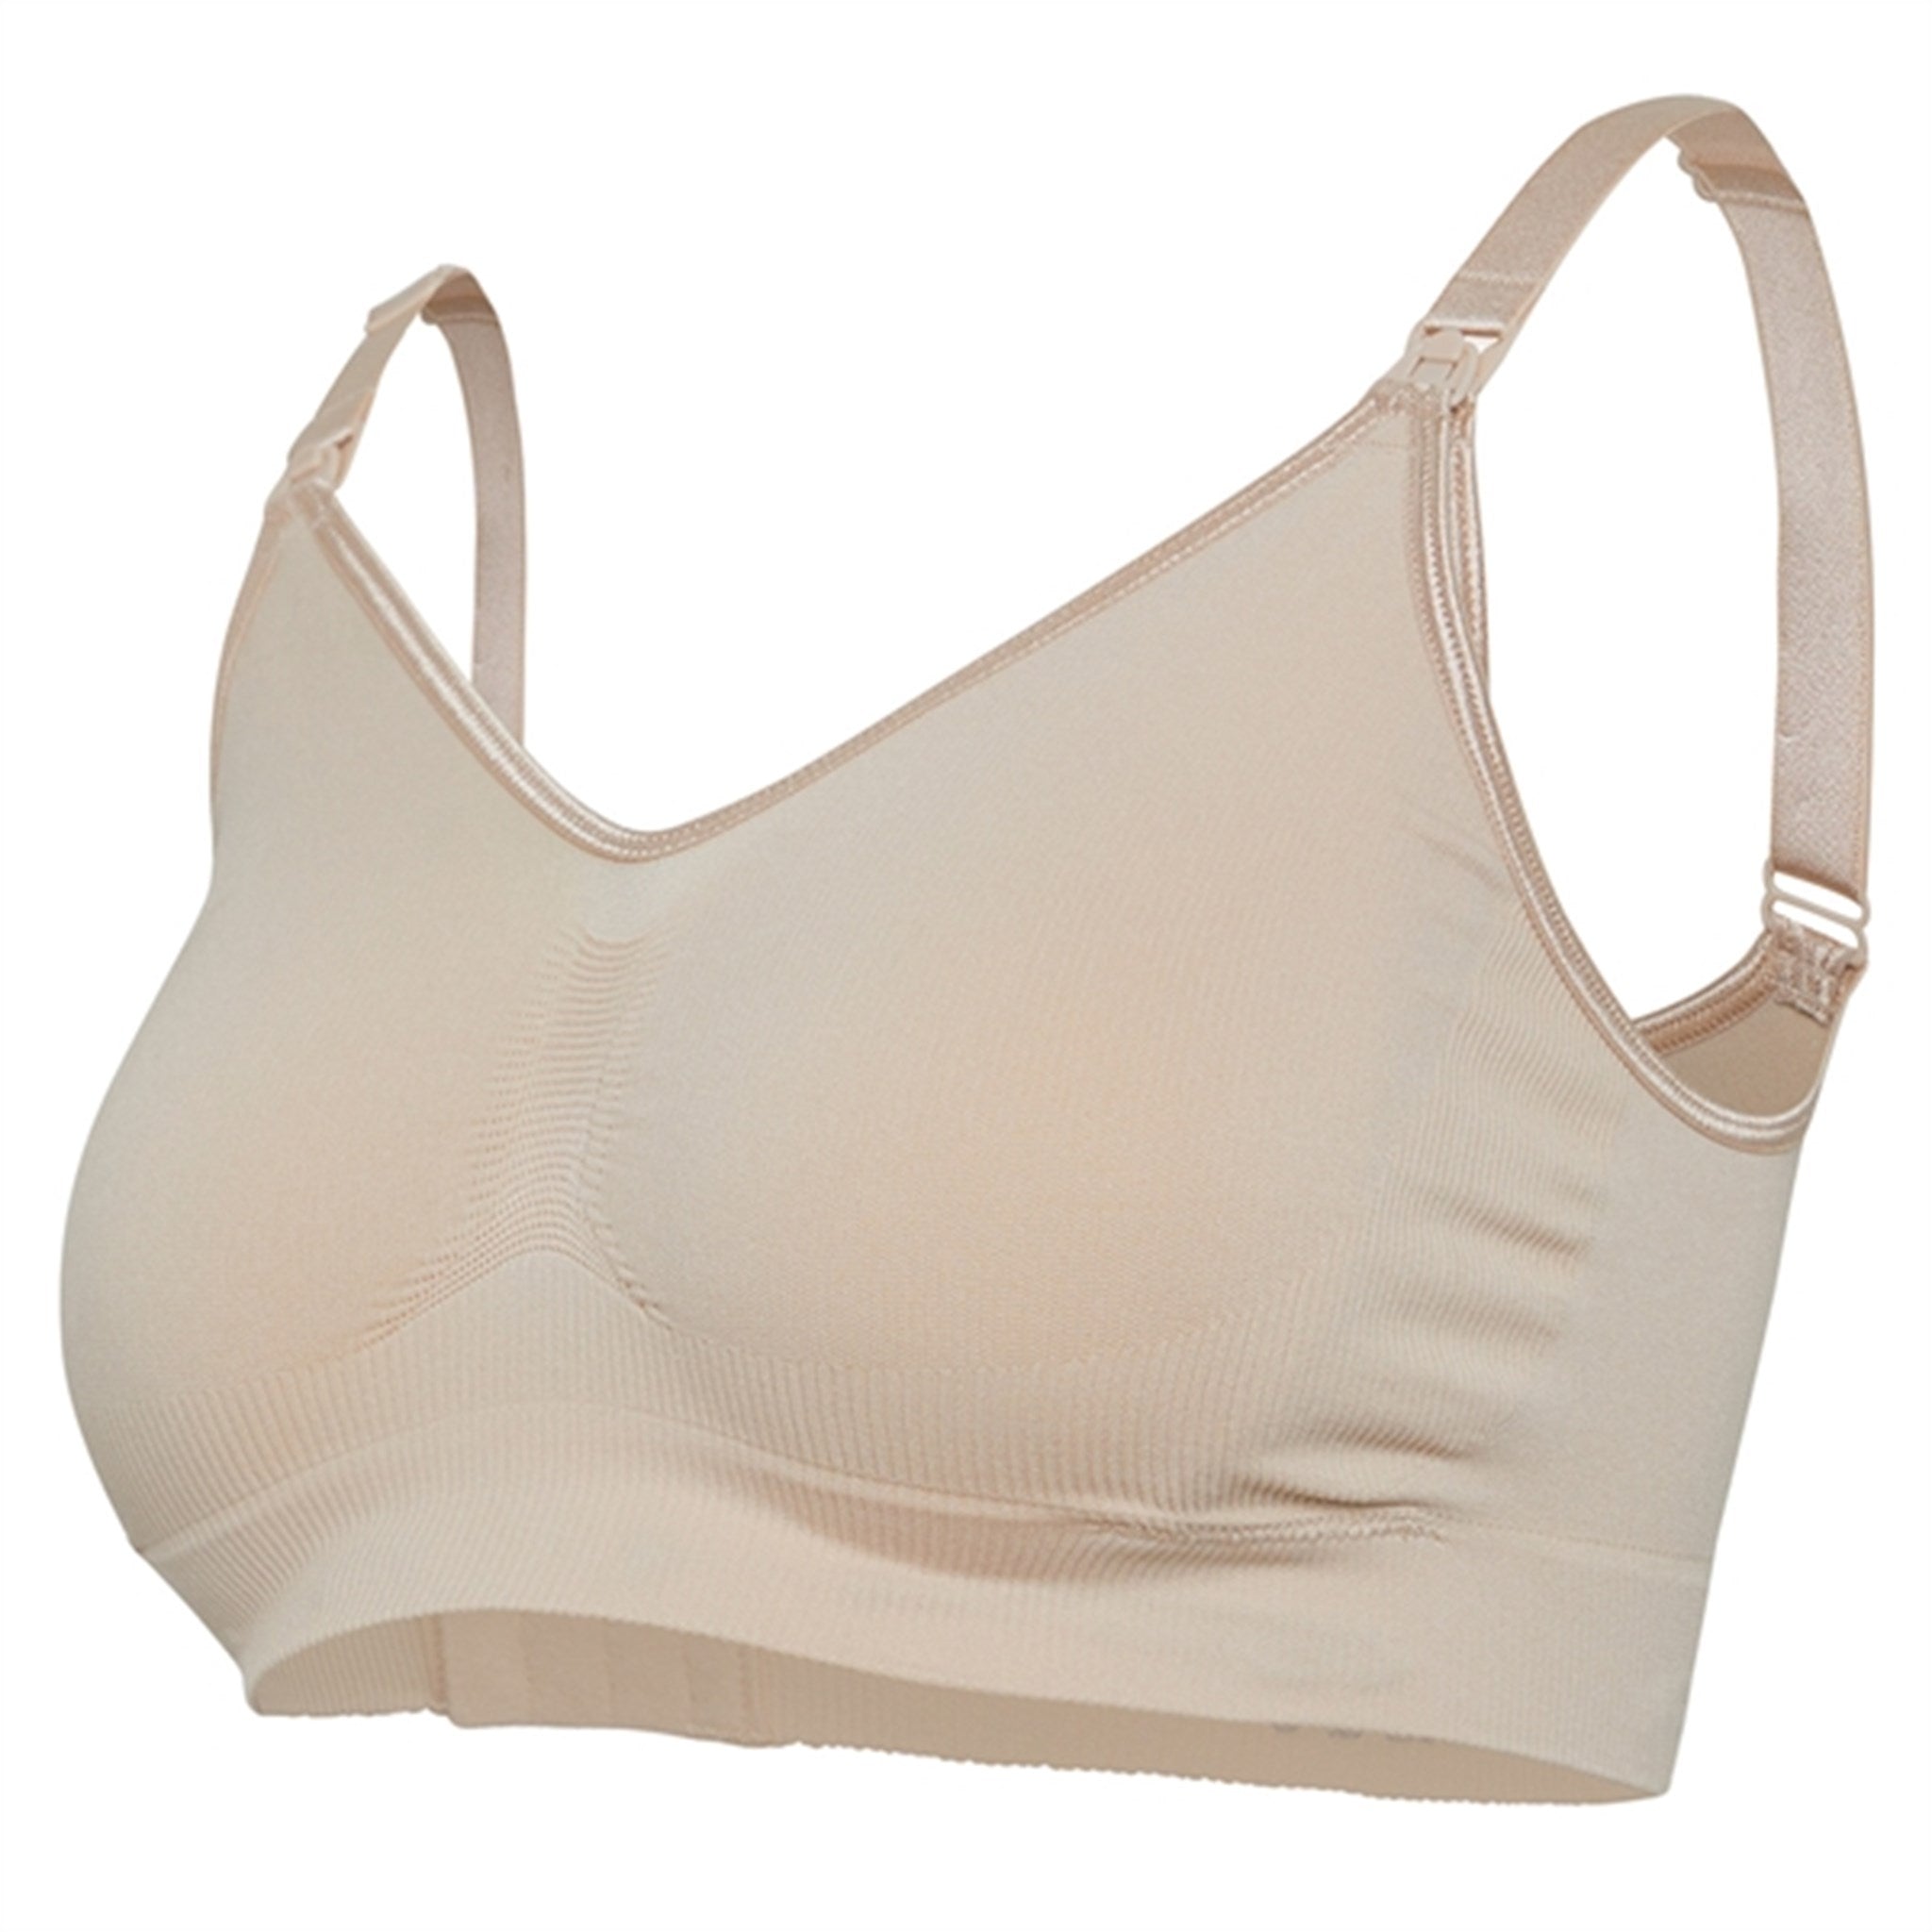 Carriwell Maternity And Nursing Bra With Carri-Gel Support Honey